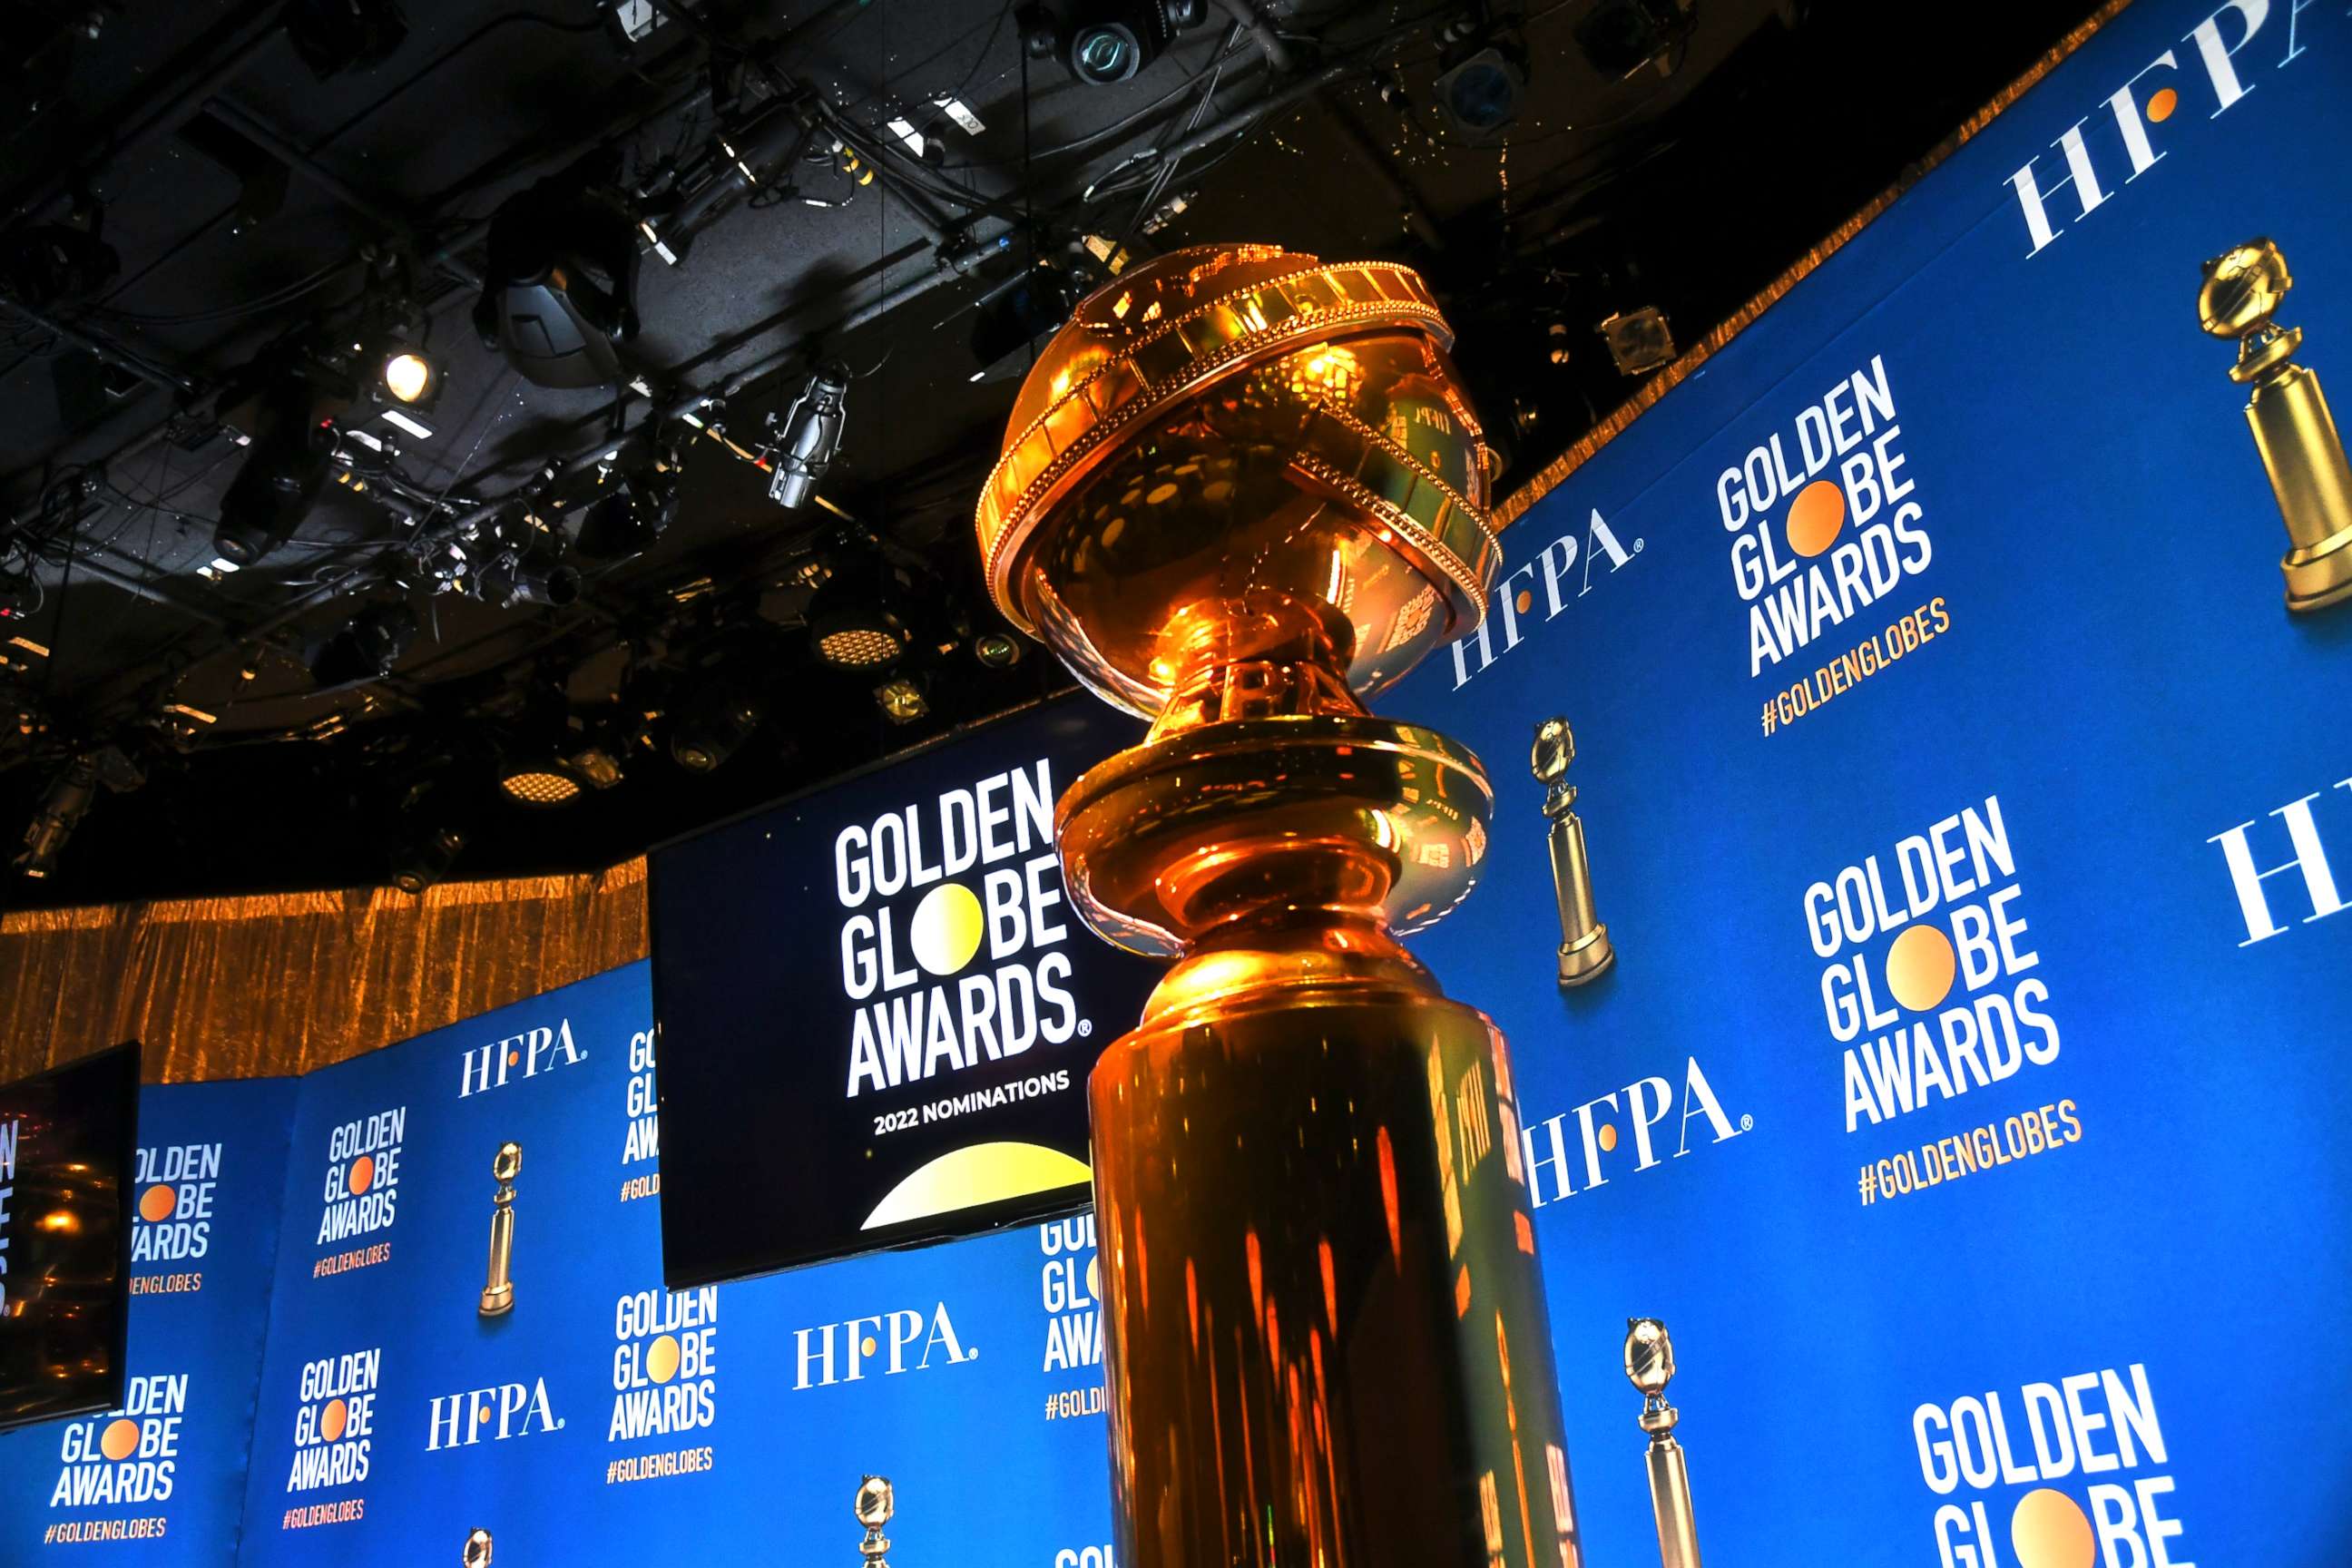 PHOTO: A view of the Golden Globe statue on stage before HFPA President Helen Hoehne announces the nominations for the 79th Annual Golden Globes at the Beverly Hilton Hotel, Dec. 13, 2021, in Beverly Hills, Calif.